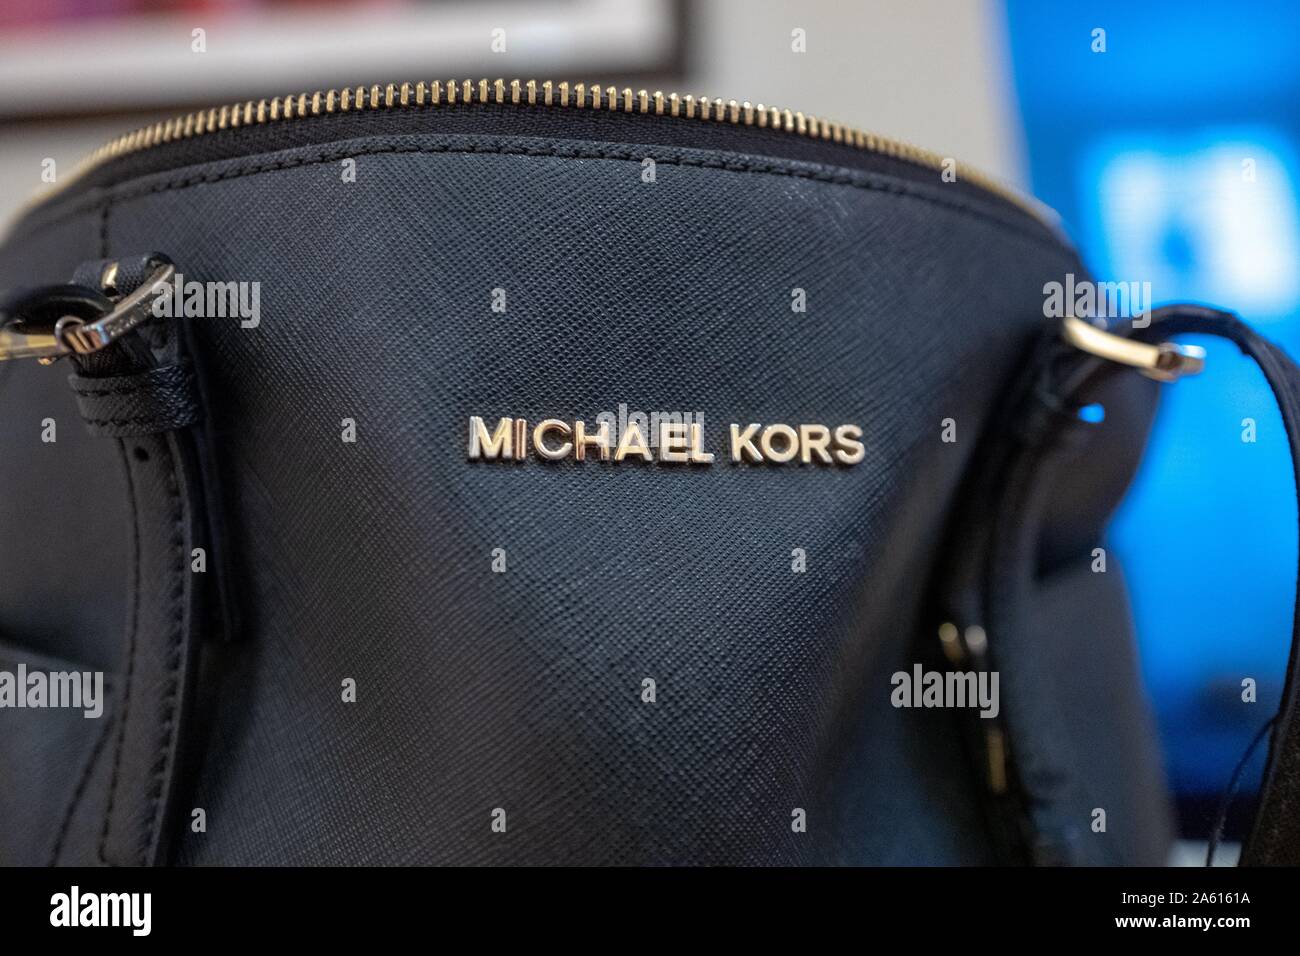 Close-up of logo for apparel company Michael Kors on a black leather handbag in a domestic room, August 21, 2019. () Stock Photo